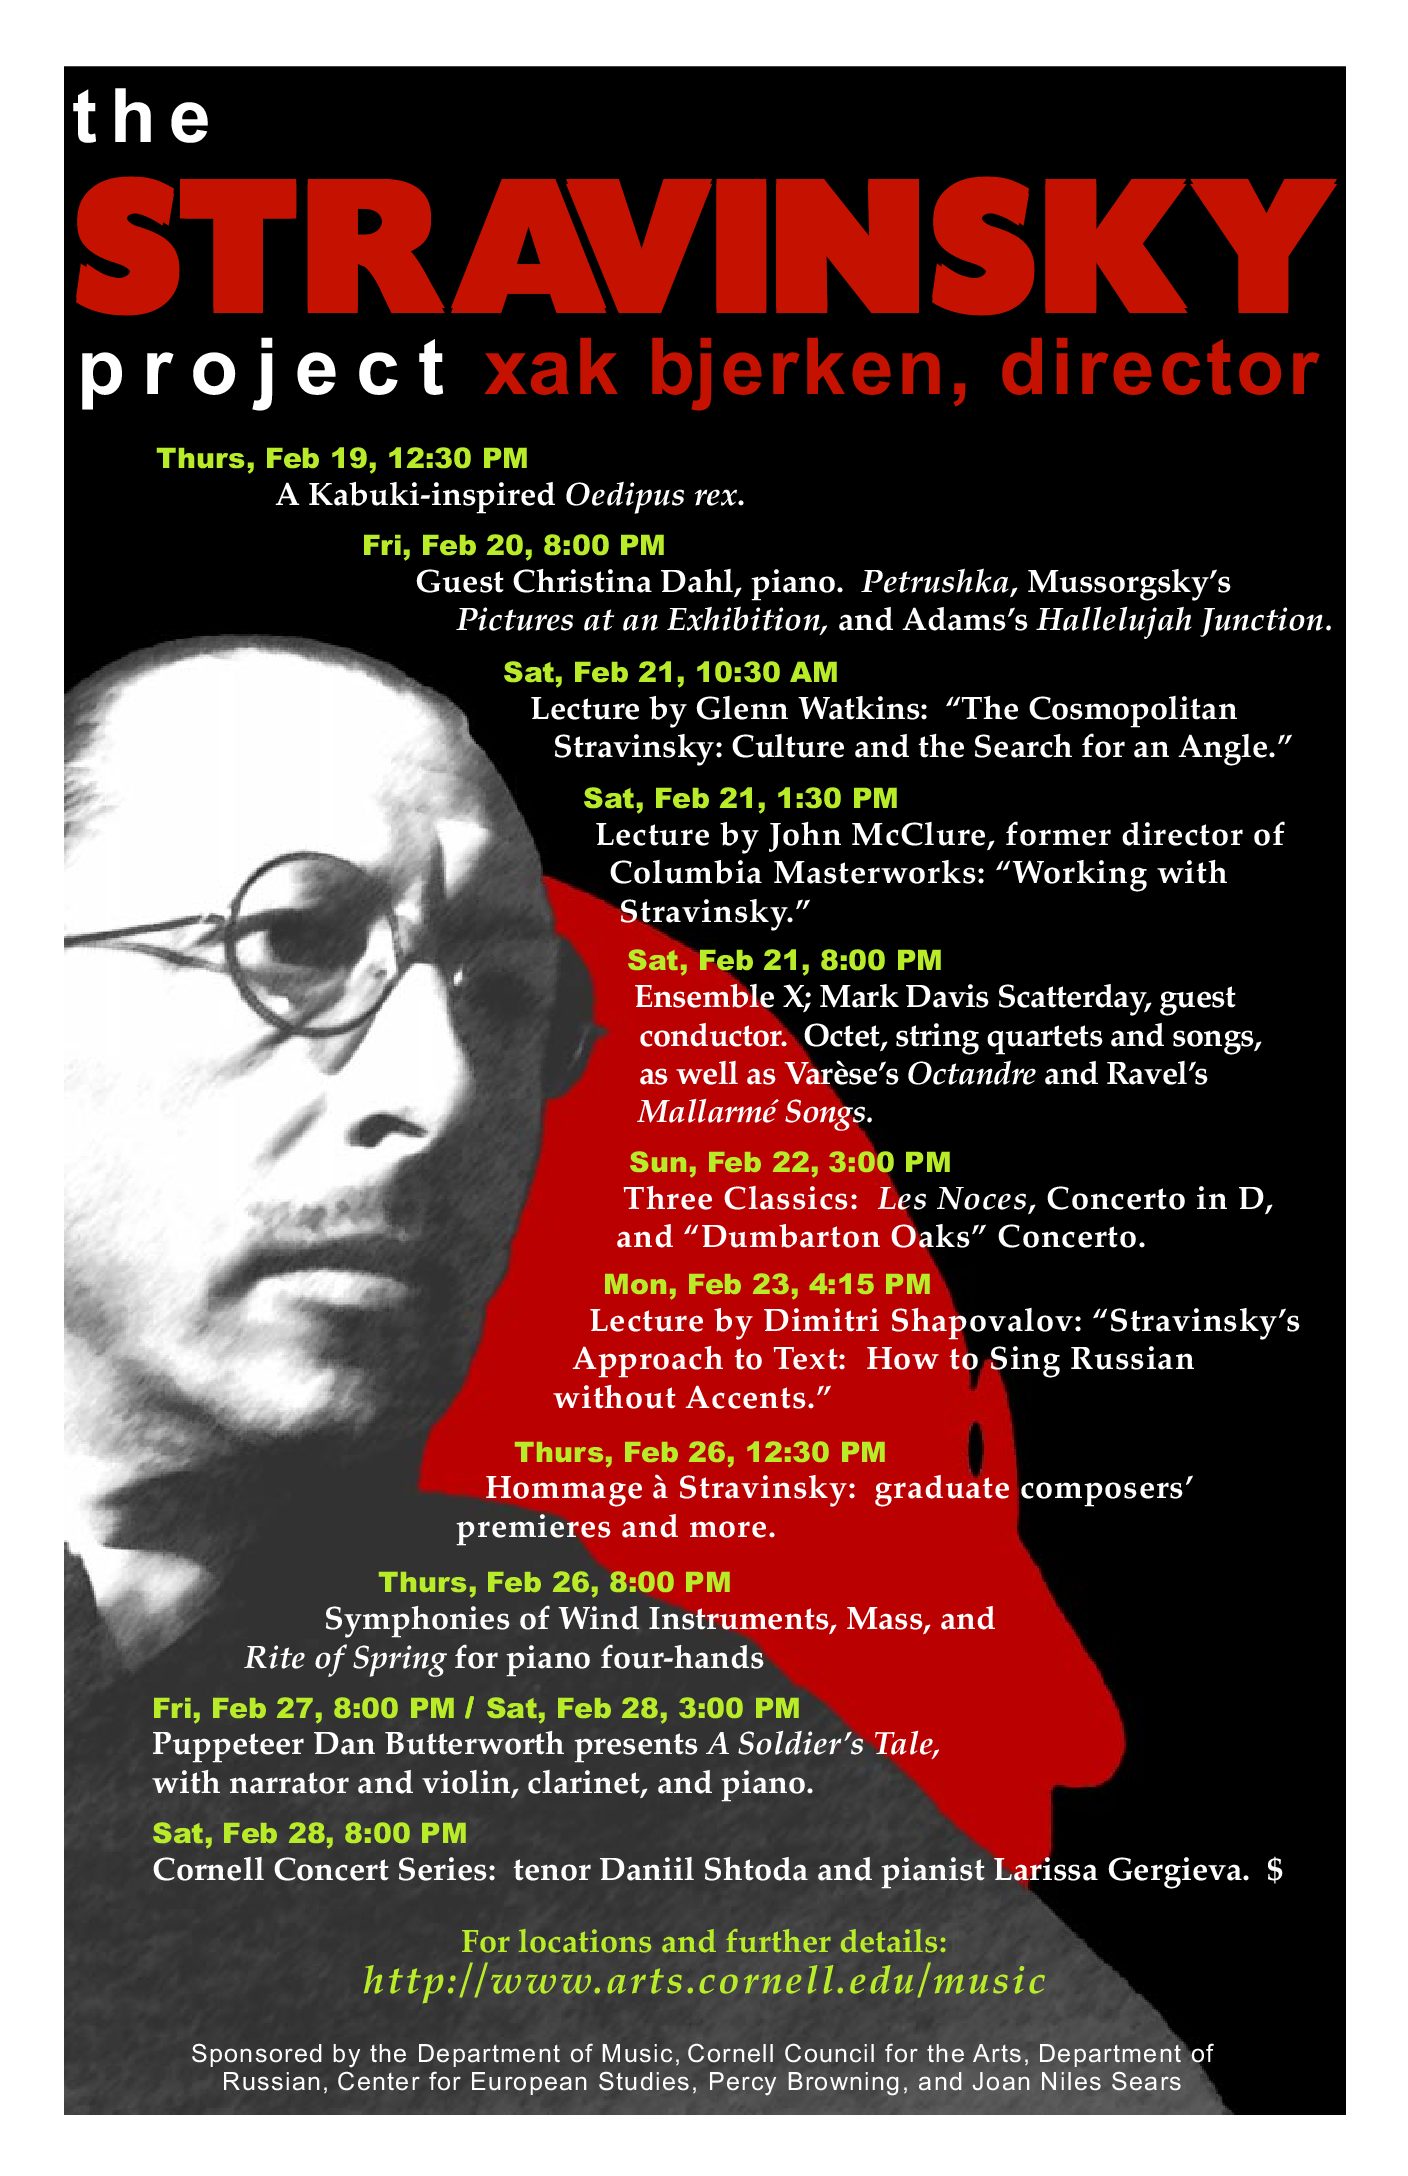 Poster for the Stravinsky Project